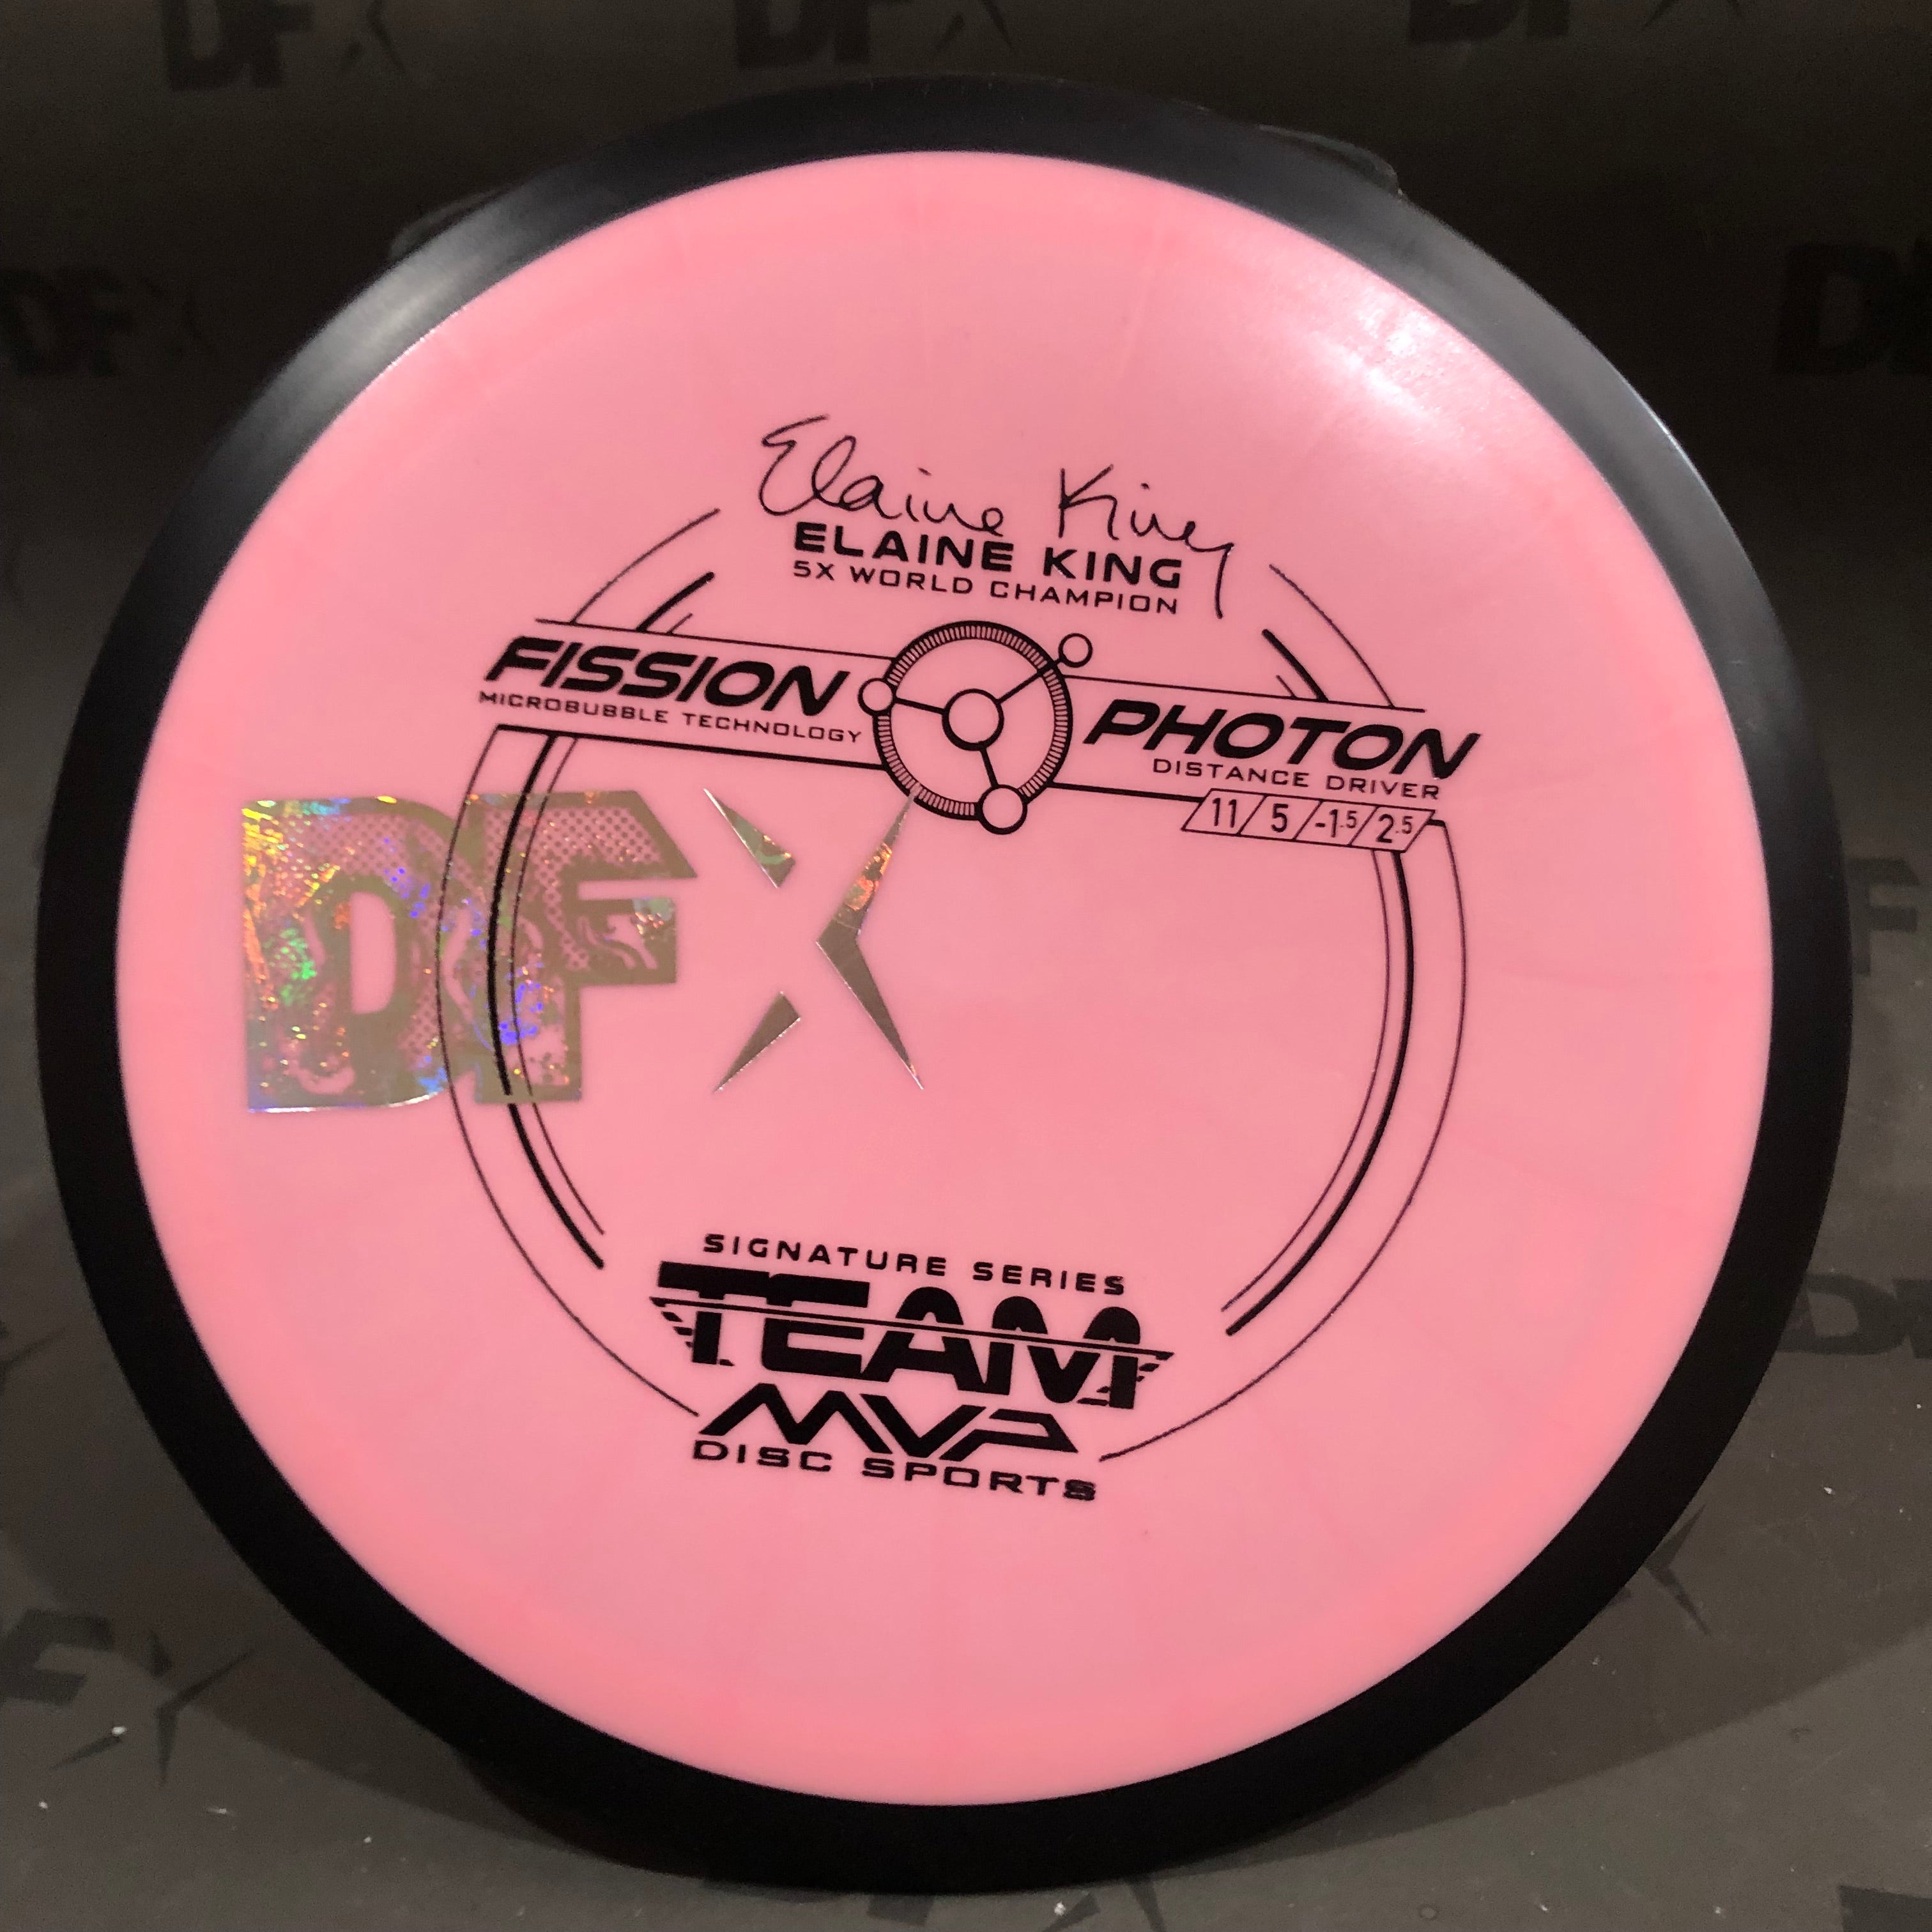 MVP Fission Photon - DFX over stamp